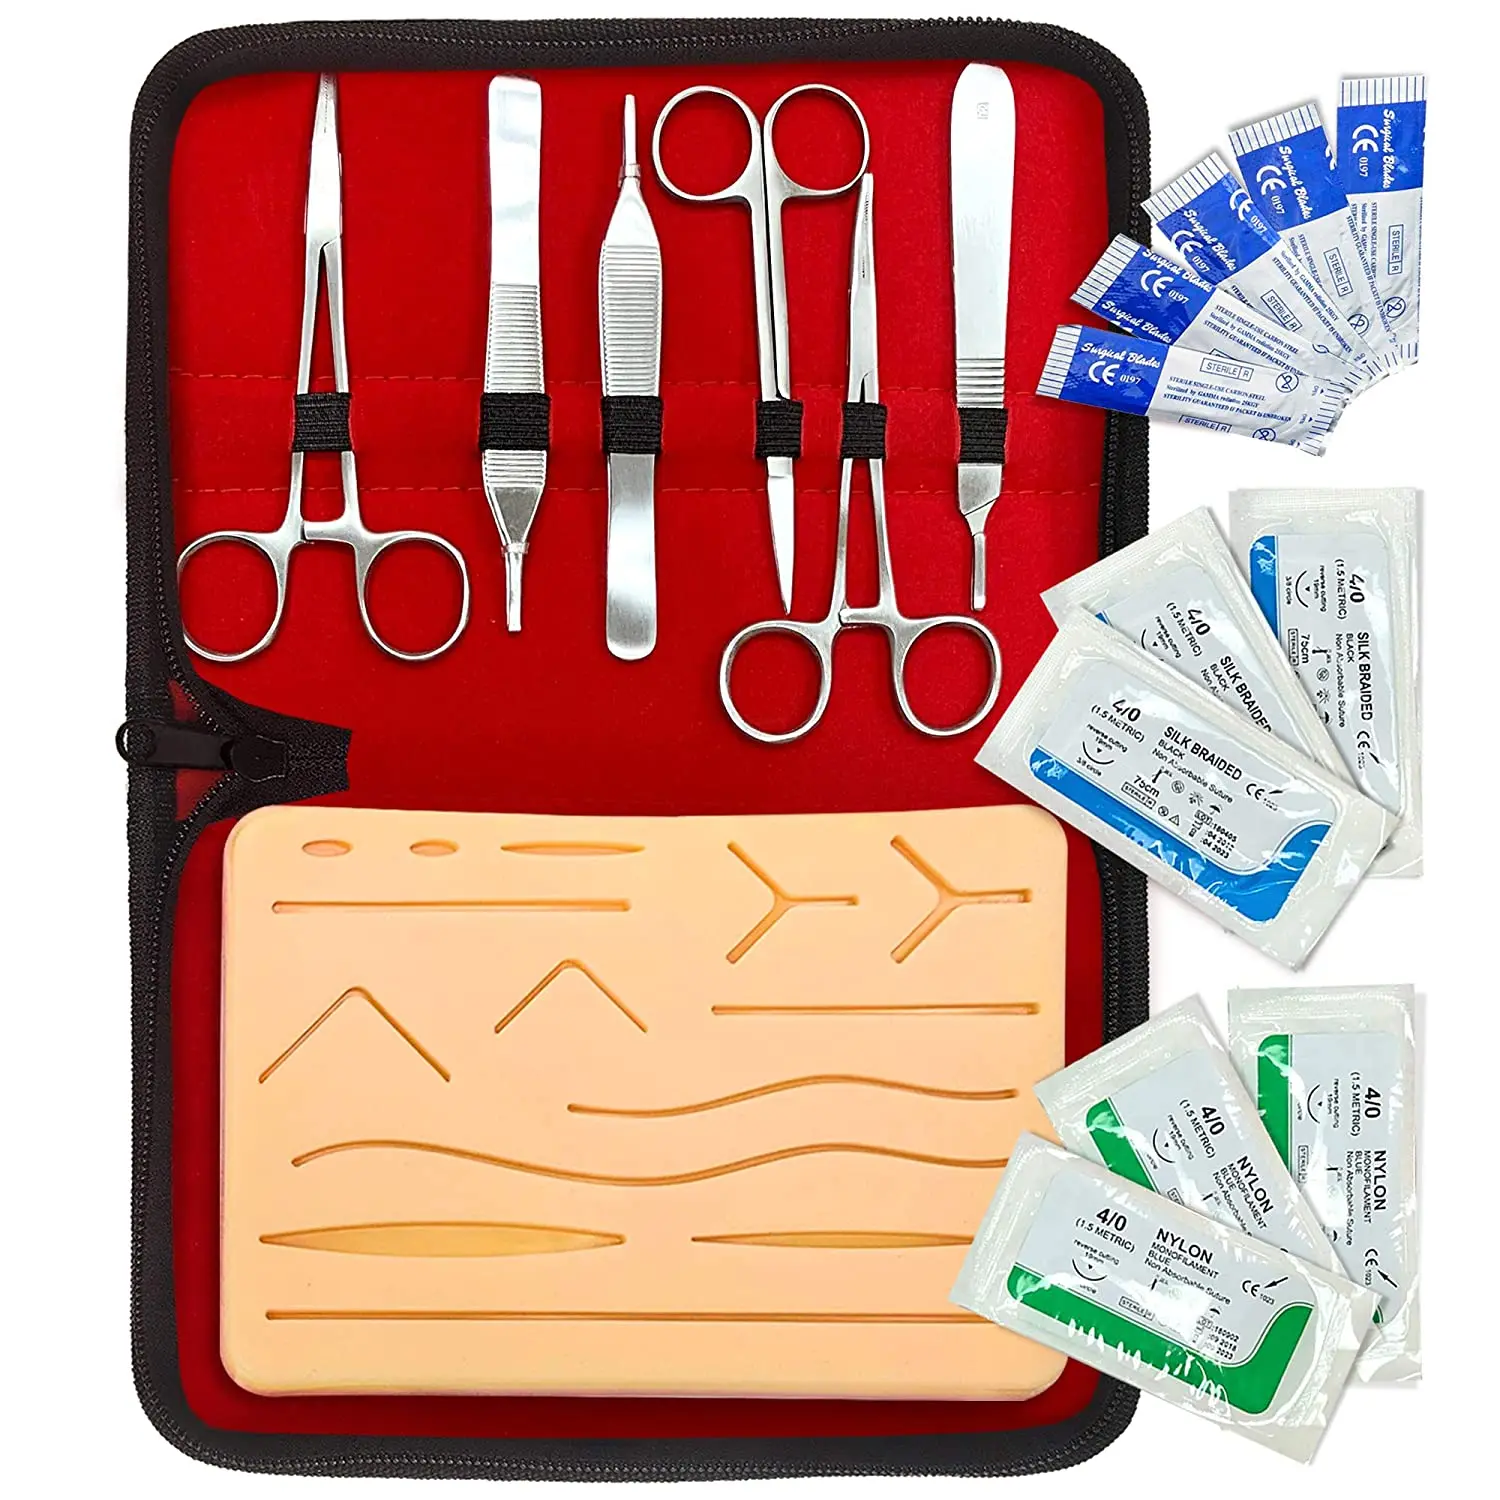 Scicalife Suture Practice Kit,Venipuncture Injection Training Stitching Pad Simulation Blood Return Module Ideal Practice Suture Training Kit for Medical and Vet Students